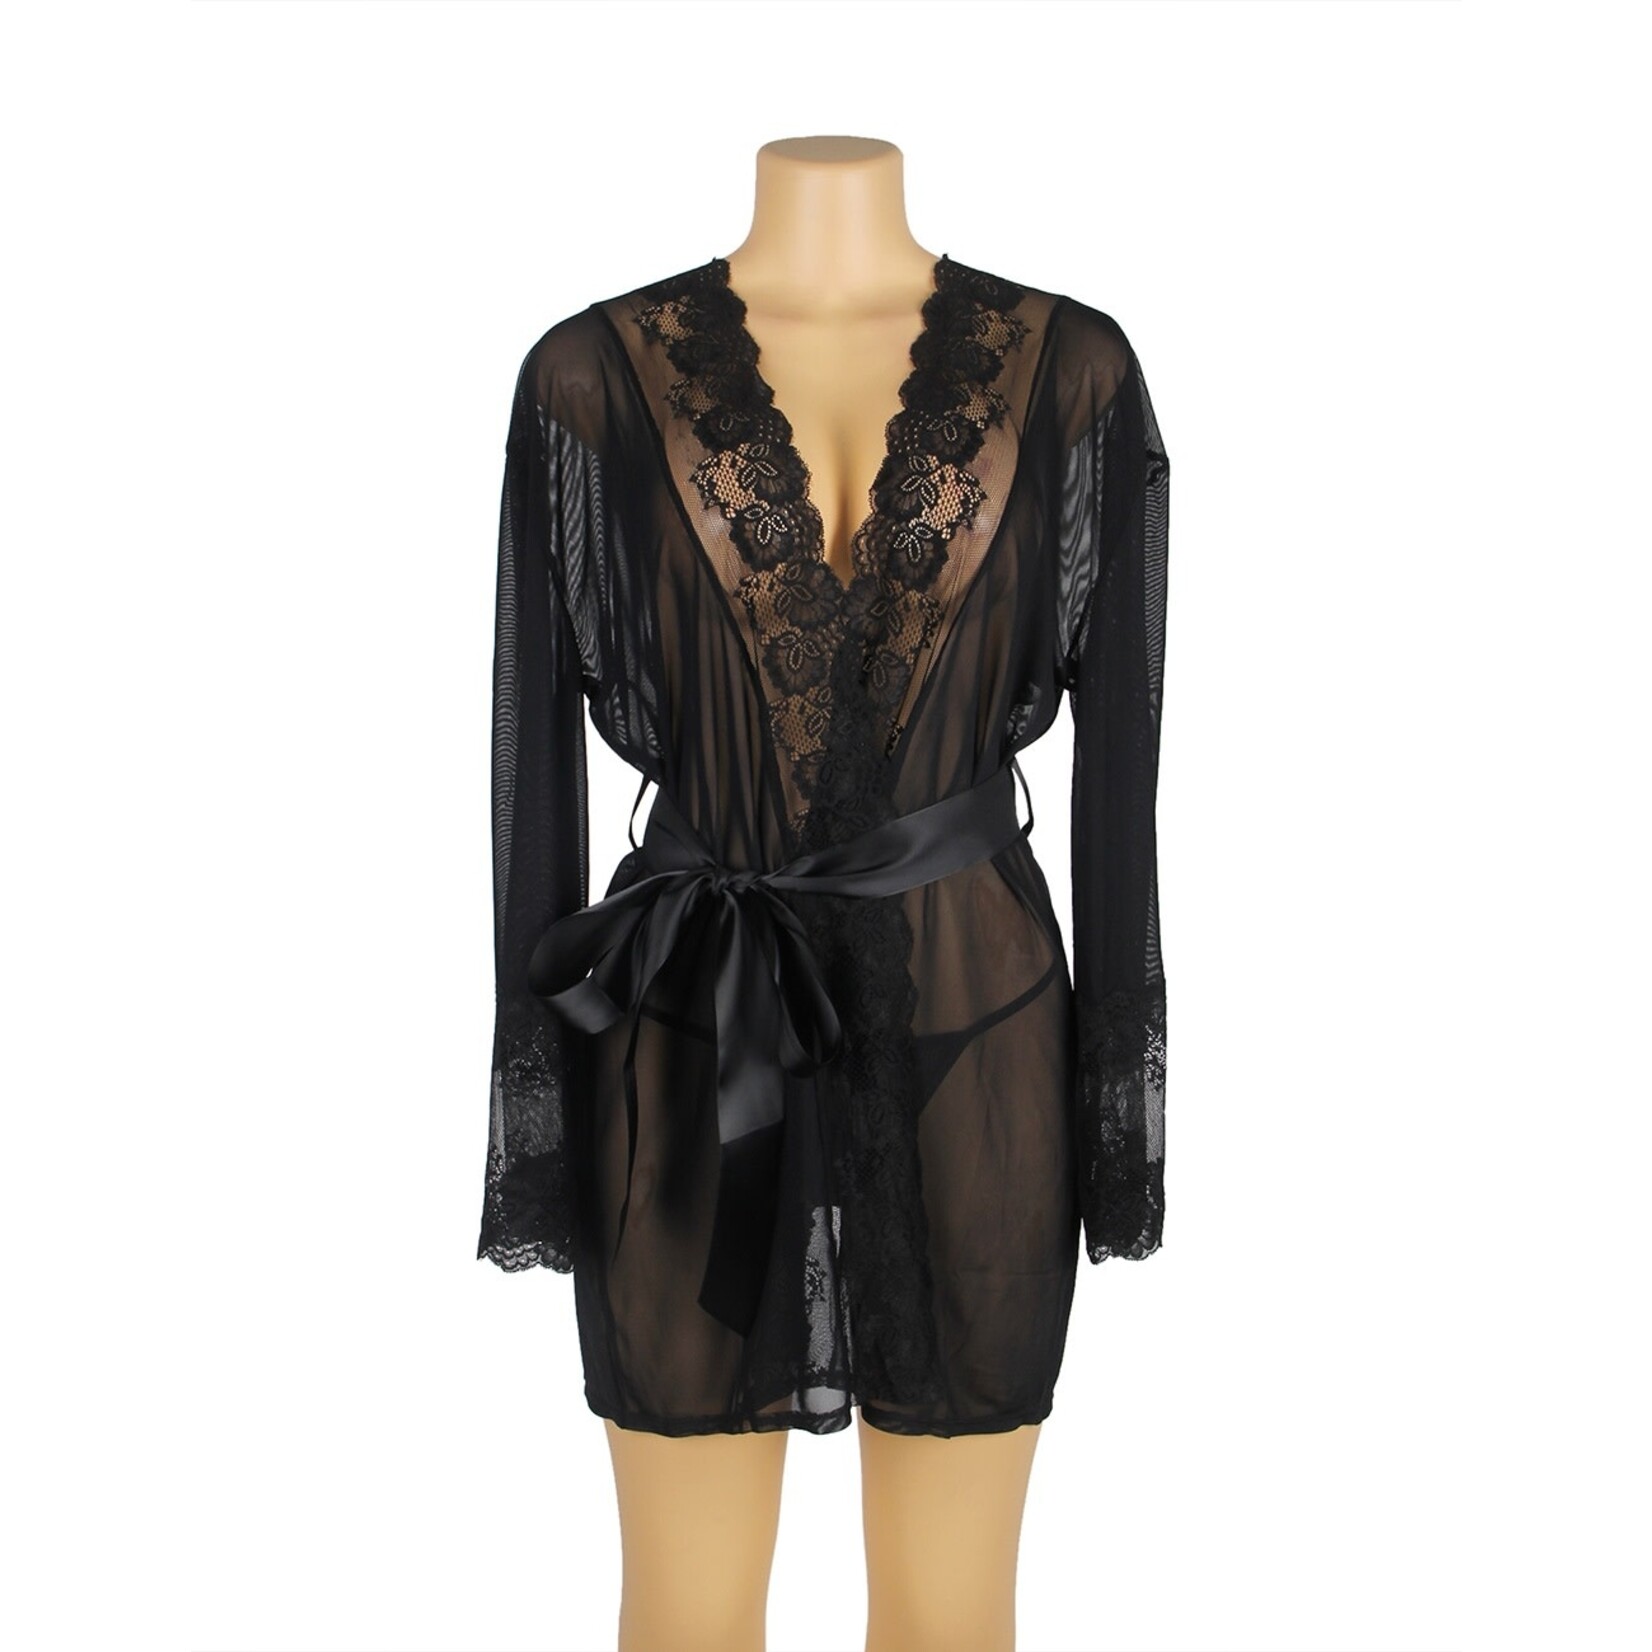 OH YEAH! -  BLACK LACE SEXY HOLLOW OUT BACK DESIGN ROBE LINGERIE WITH PANTIES XS-S